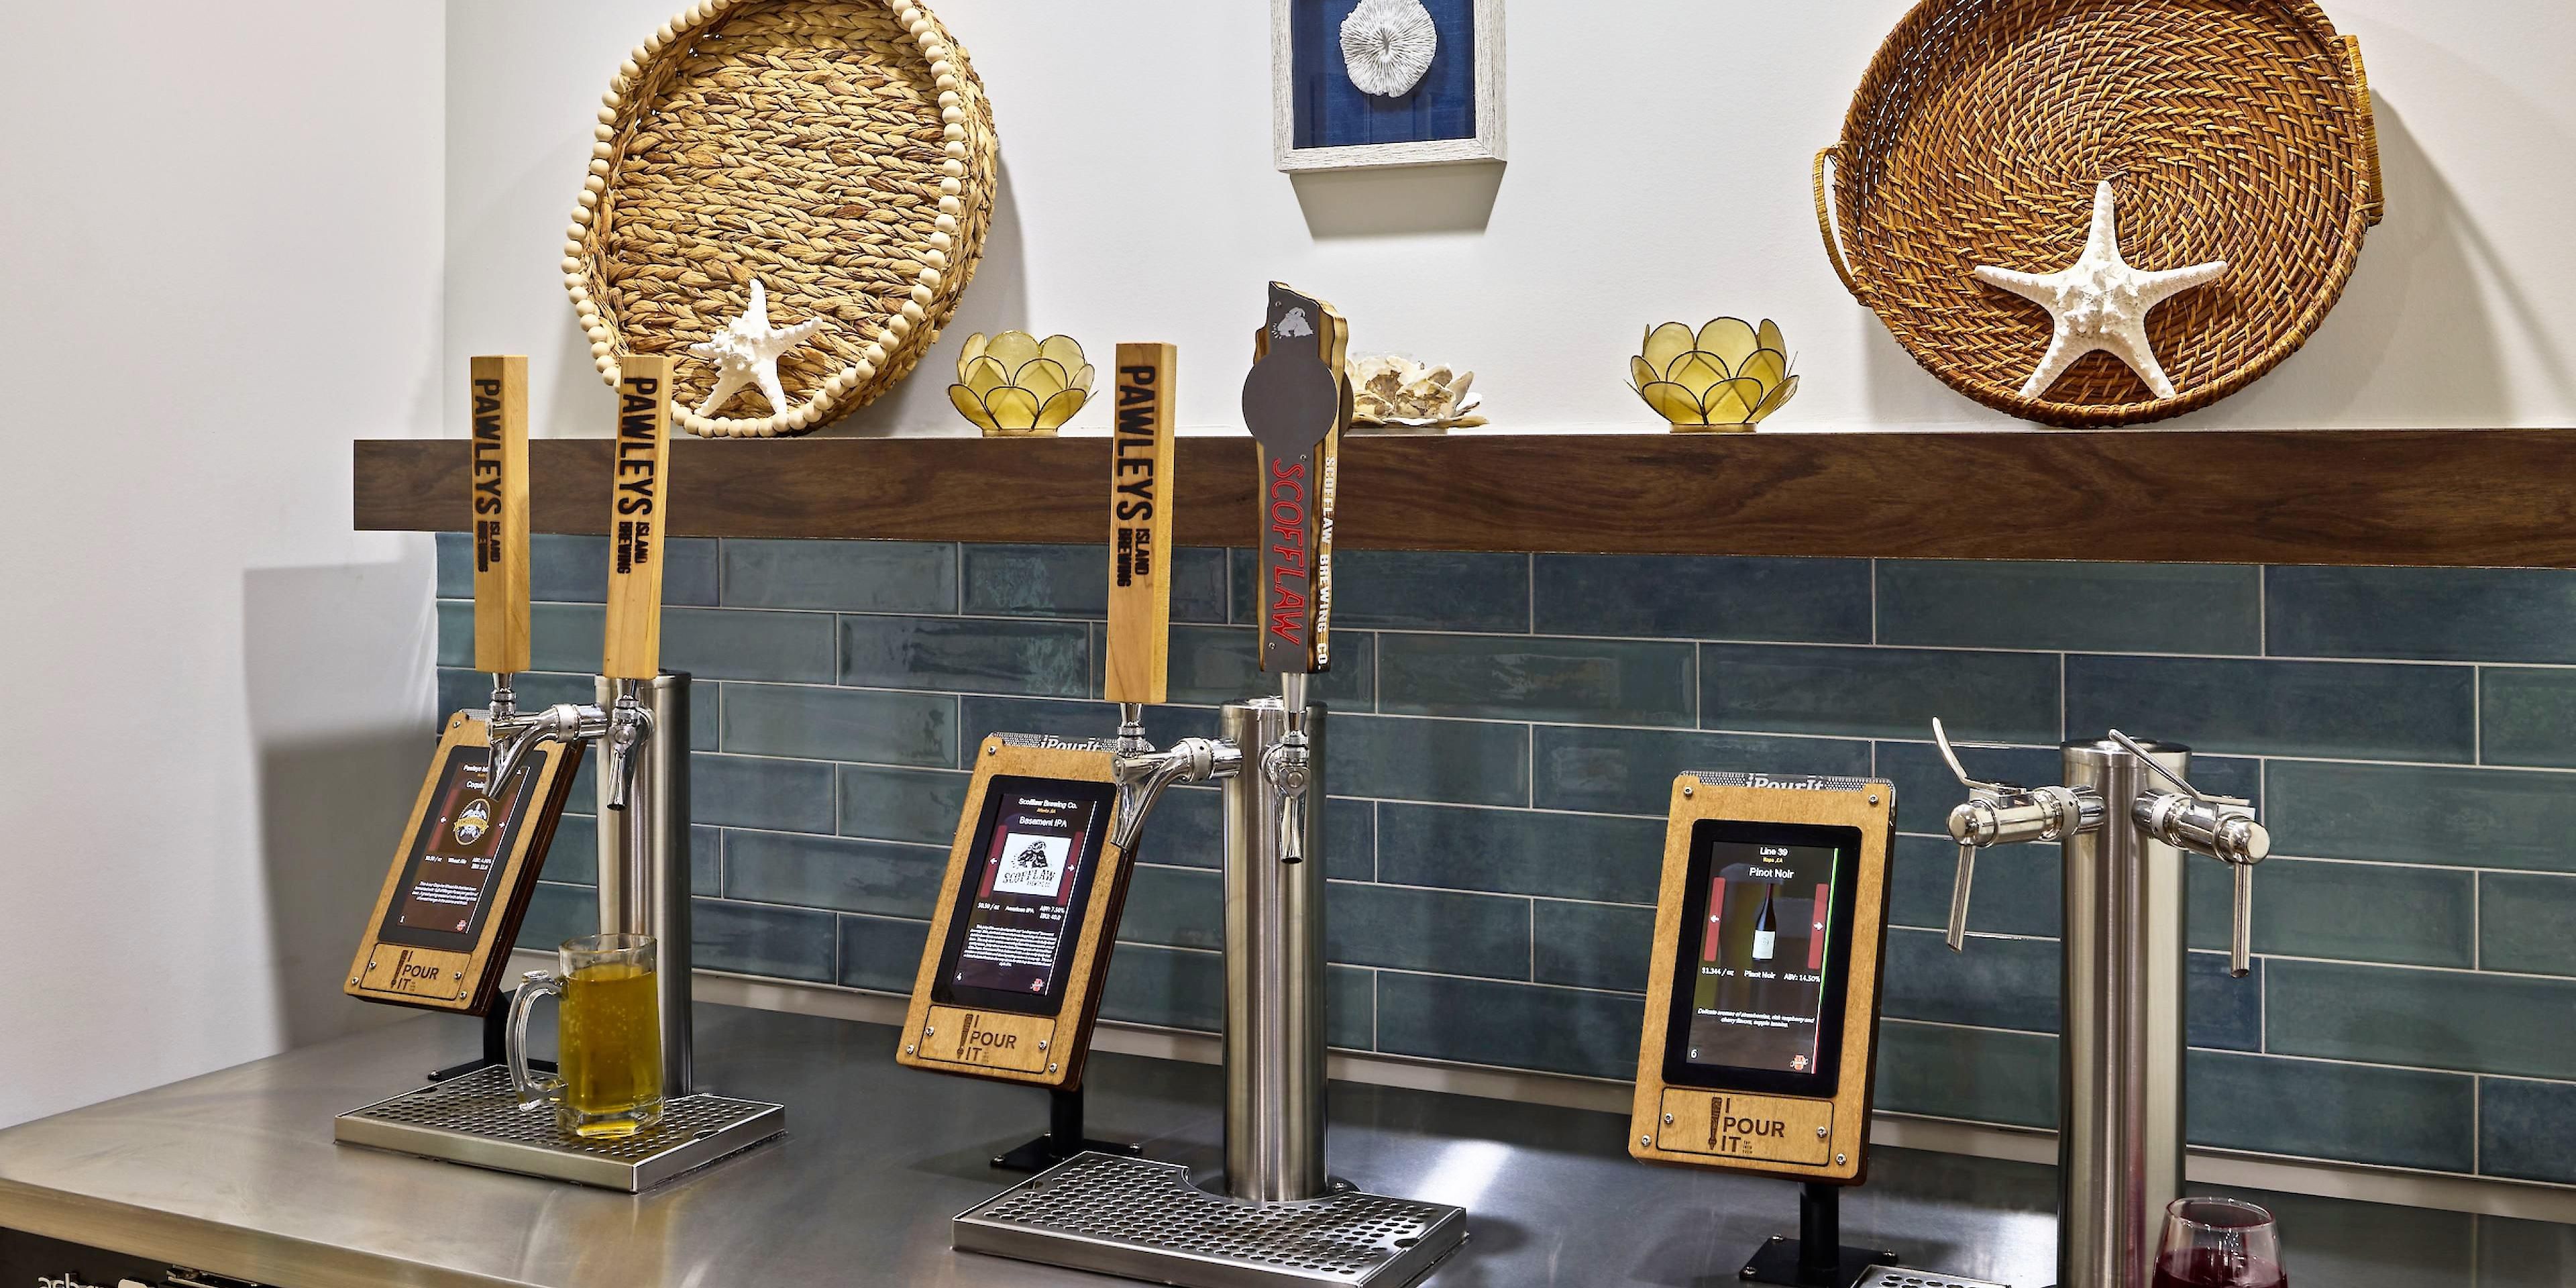 Unwind on vacation! Our guests can enjoy our self-serve beer and wine taps. We also have a large variety of snacks and beverages to purchase in our Express shop. With so much variety there is sure to be something for everyone.